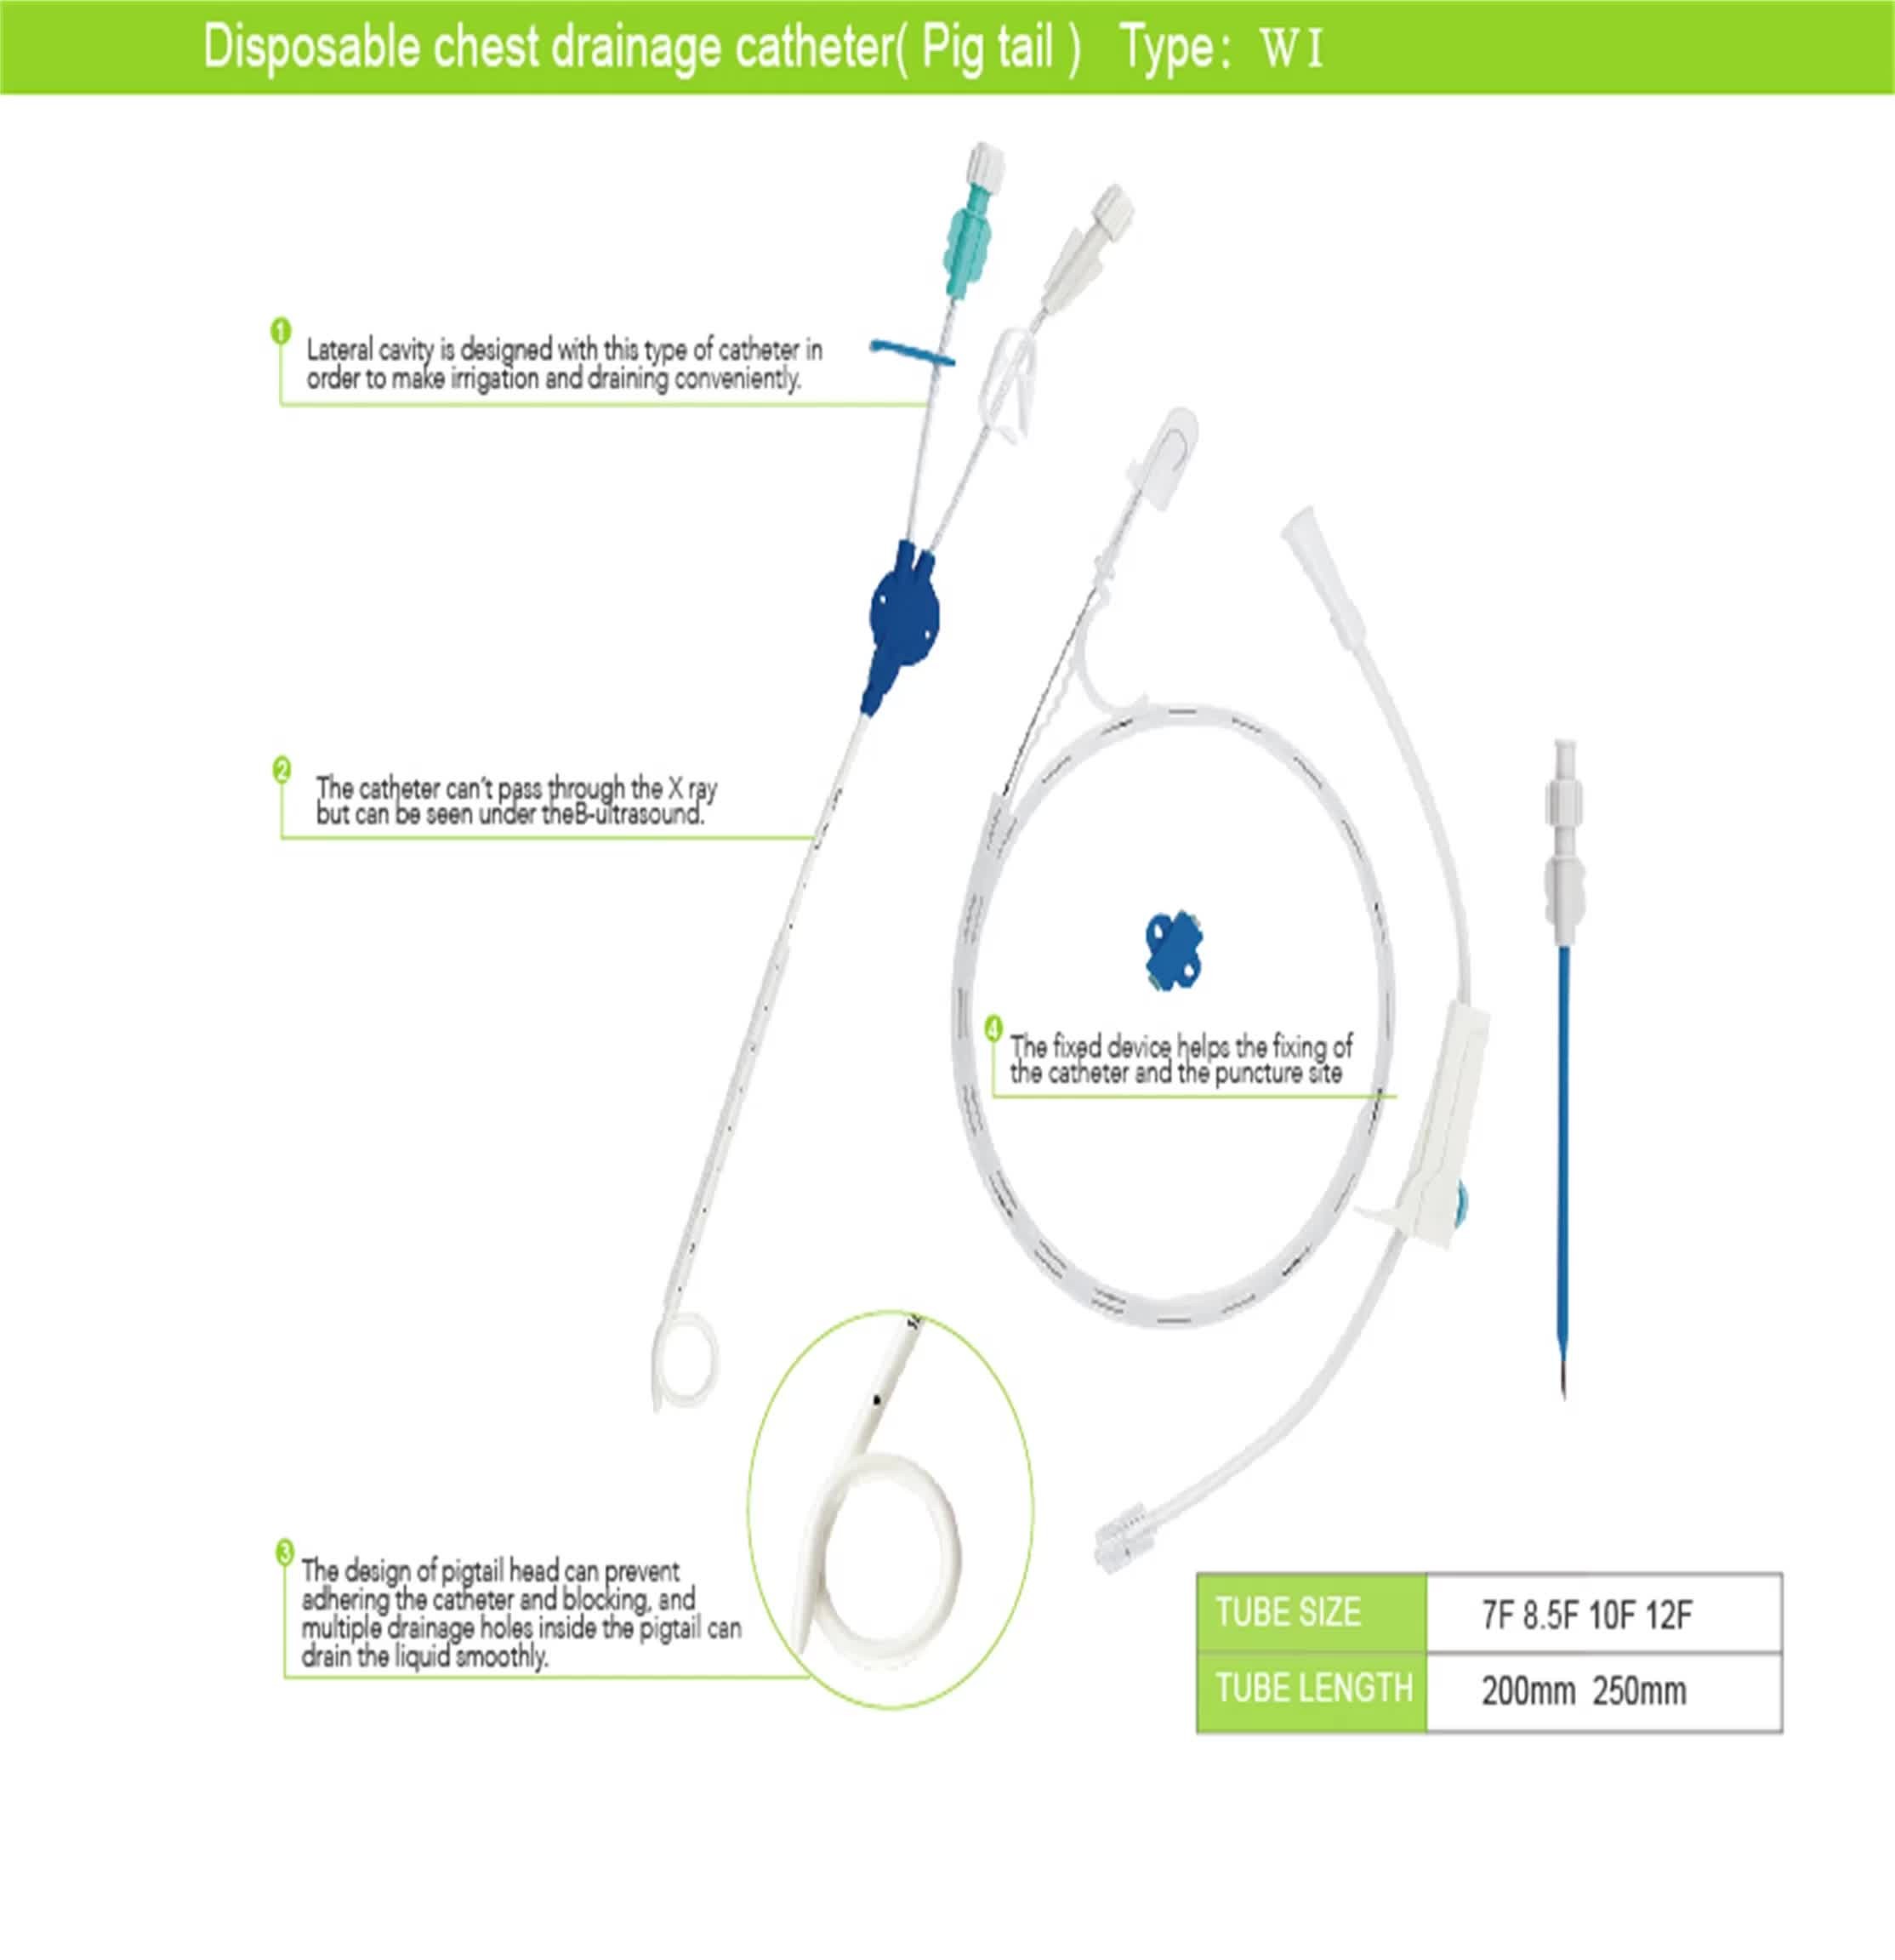 Buy CE/ISO Pigtail Double Lumen Central Venous Catheter Kit at wholesale prices